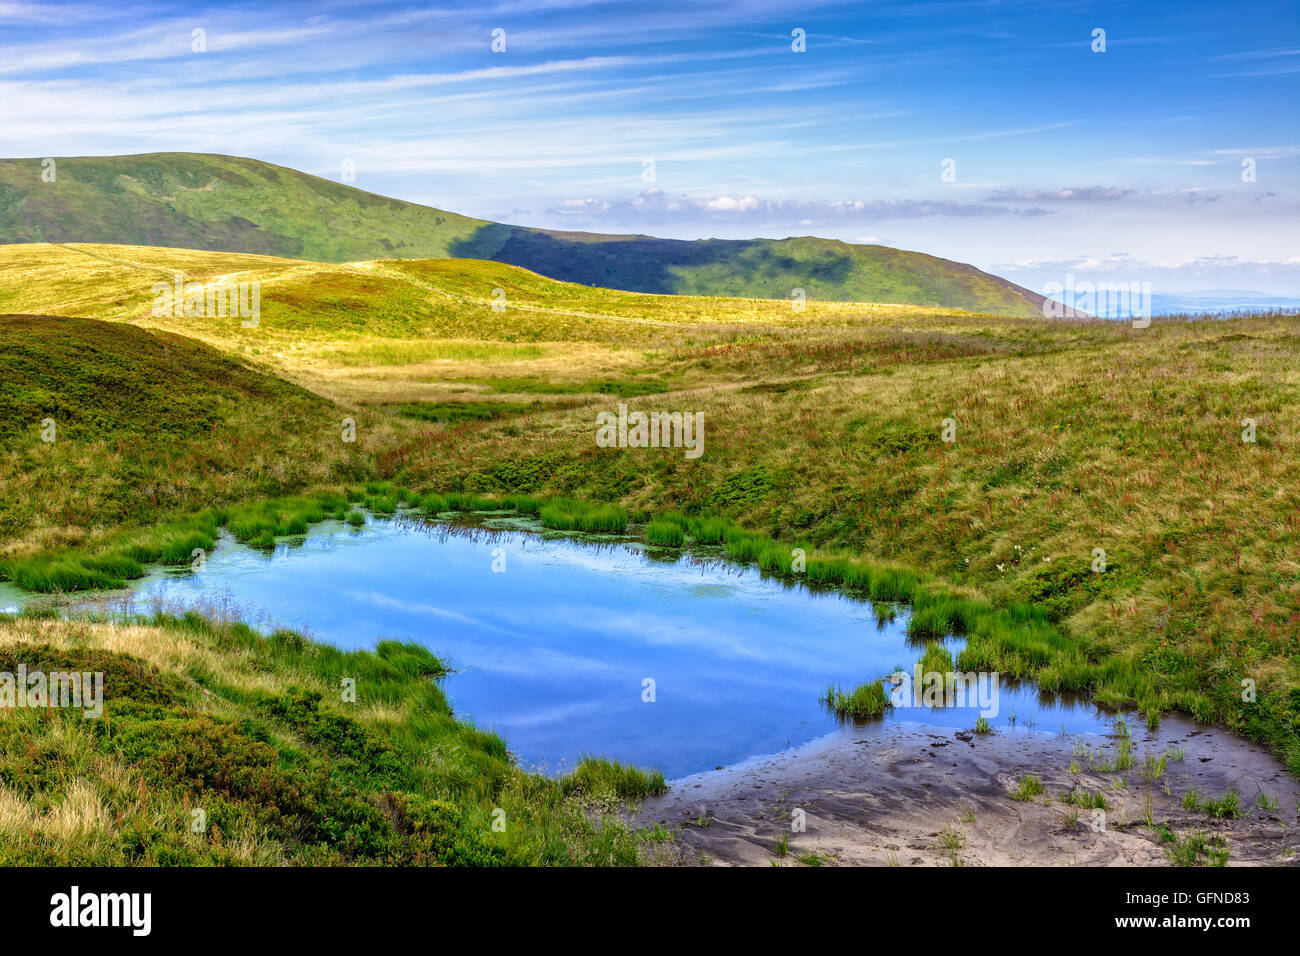 summer landscape in mountains with small swamp on hill side Stock Photo